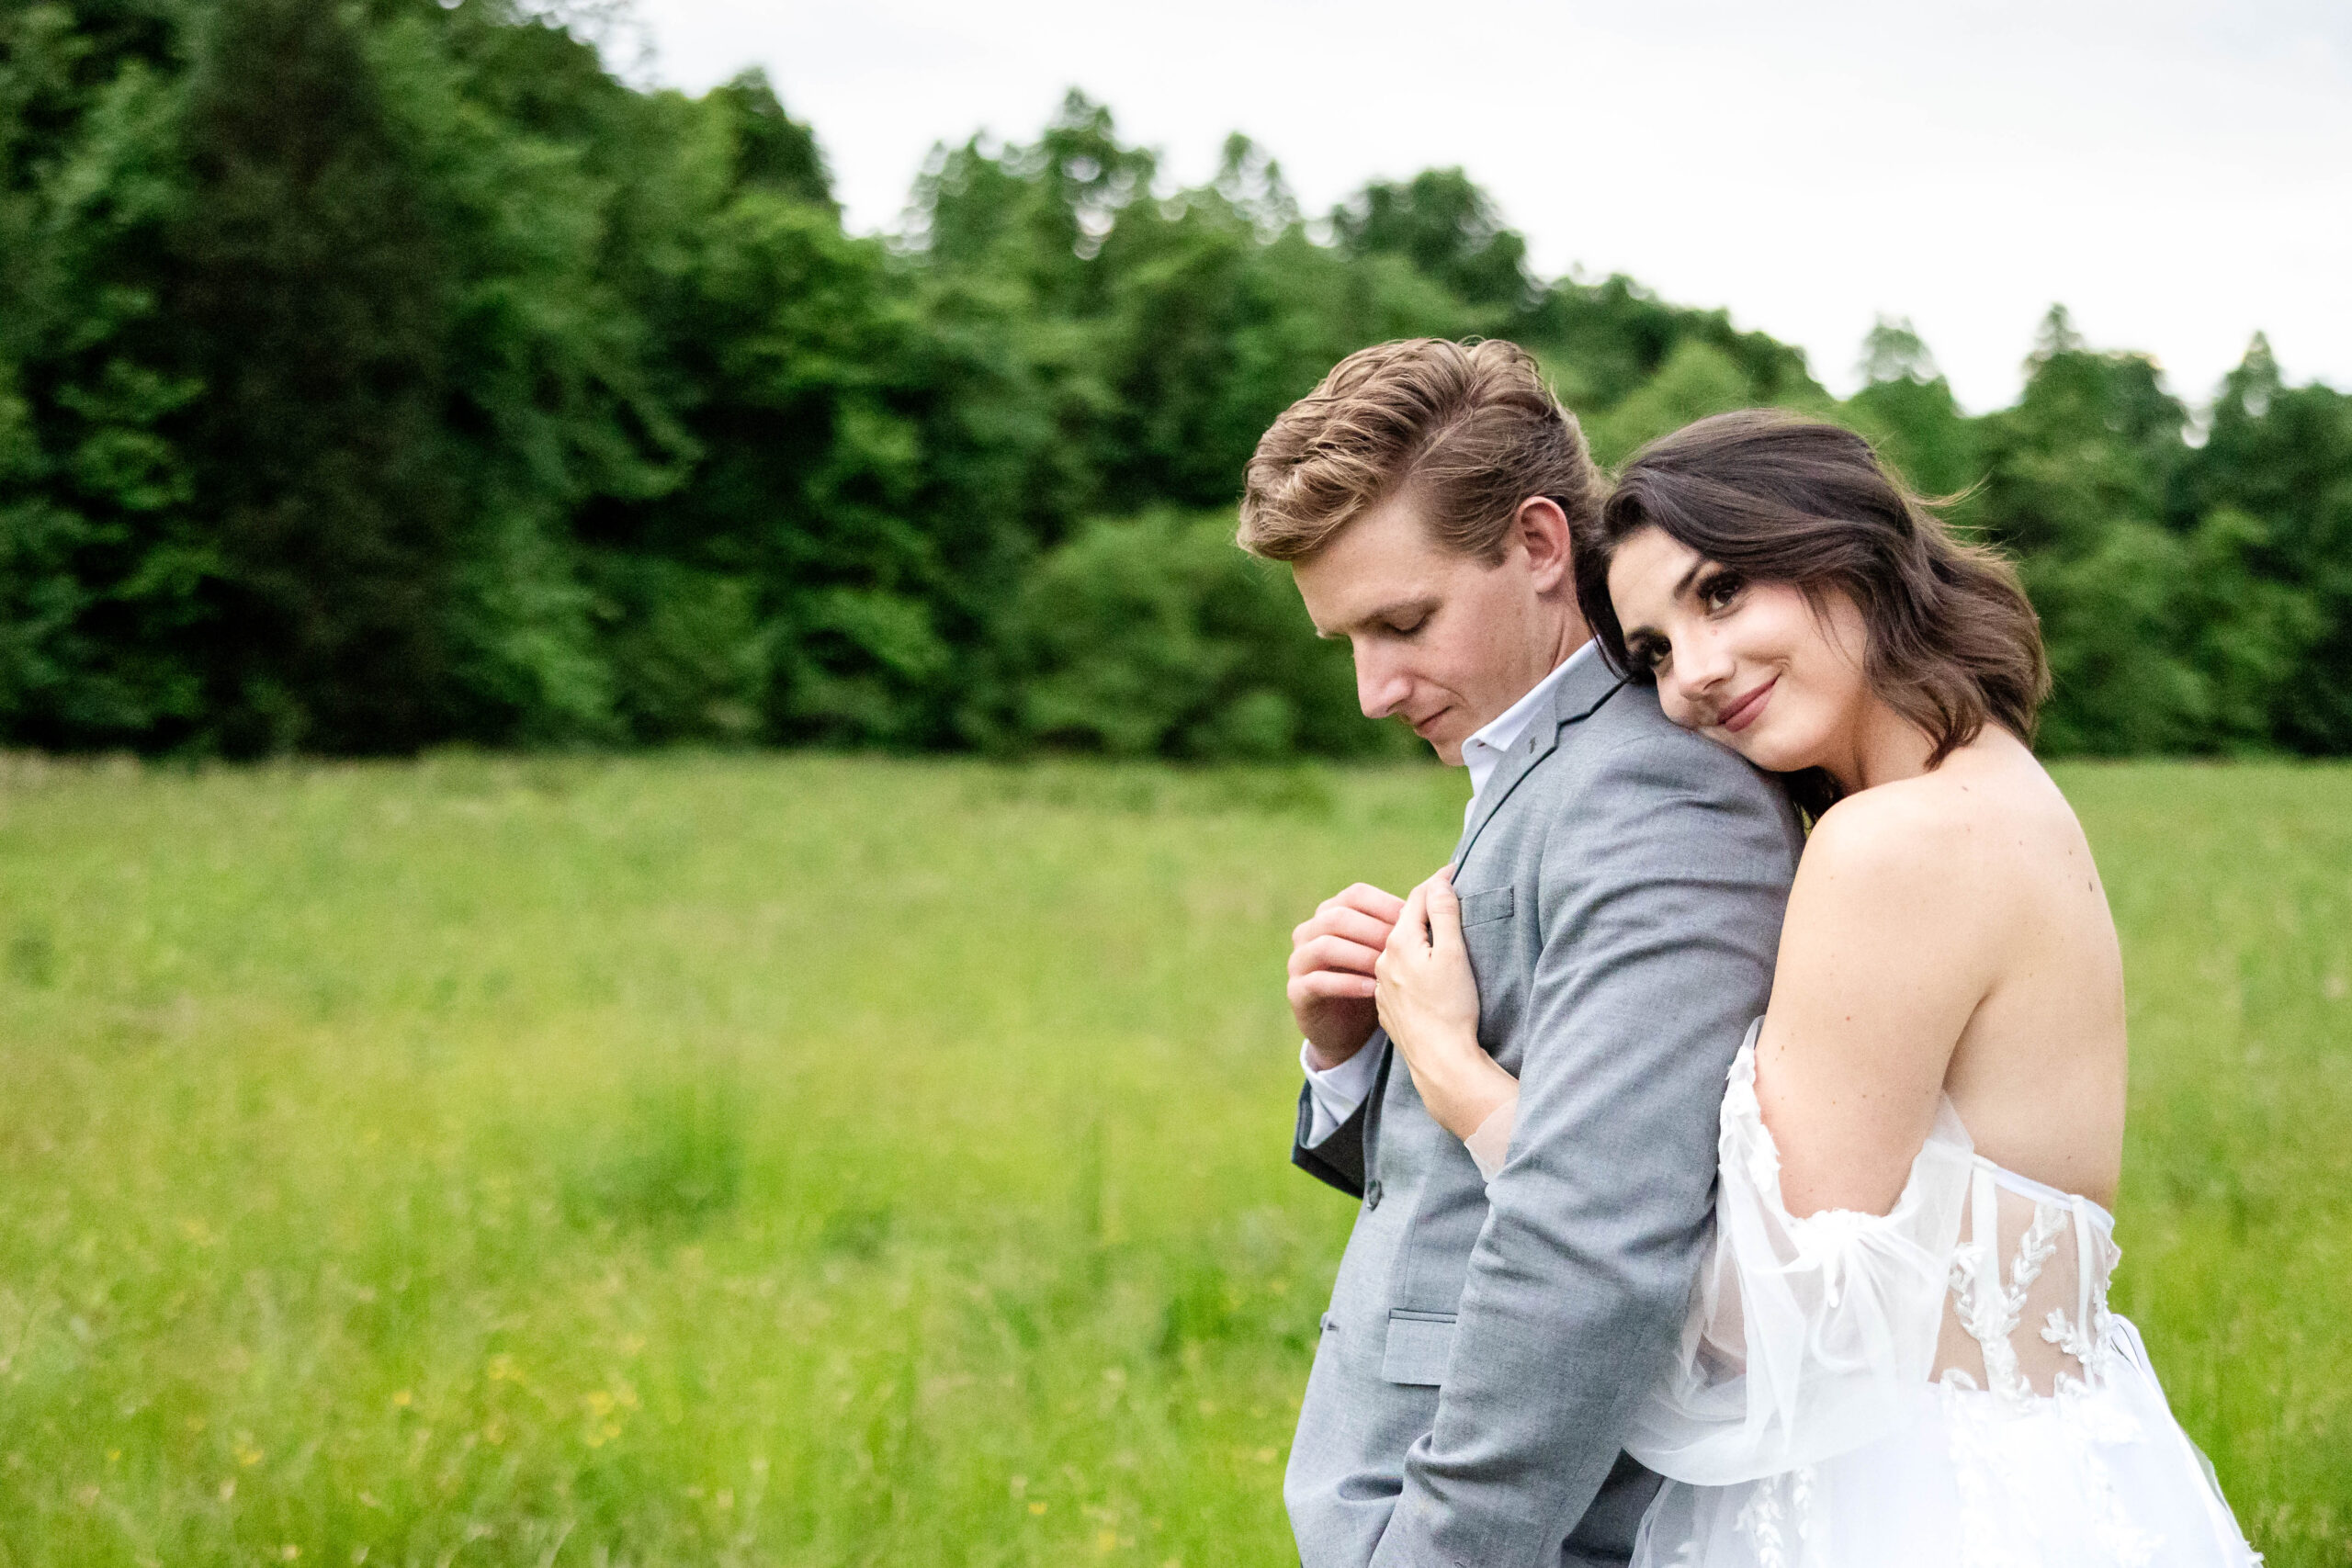 Bride and Groom in a field of bright summer green grass lined with trees in the distance. Bride is hugging her groom from behind as he gently touches her hand that is placed on his chest.